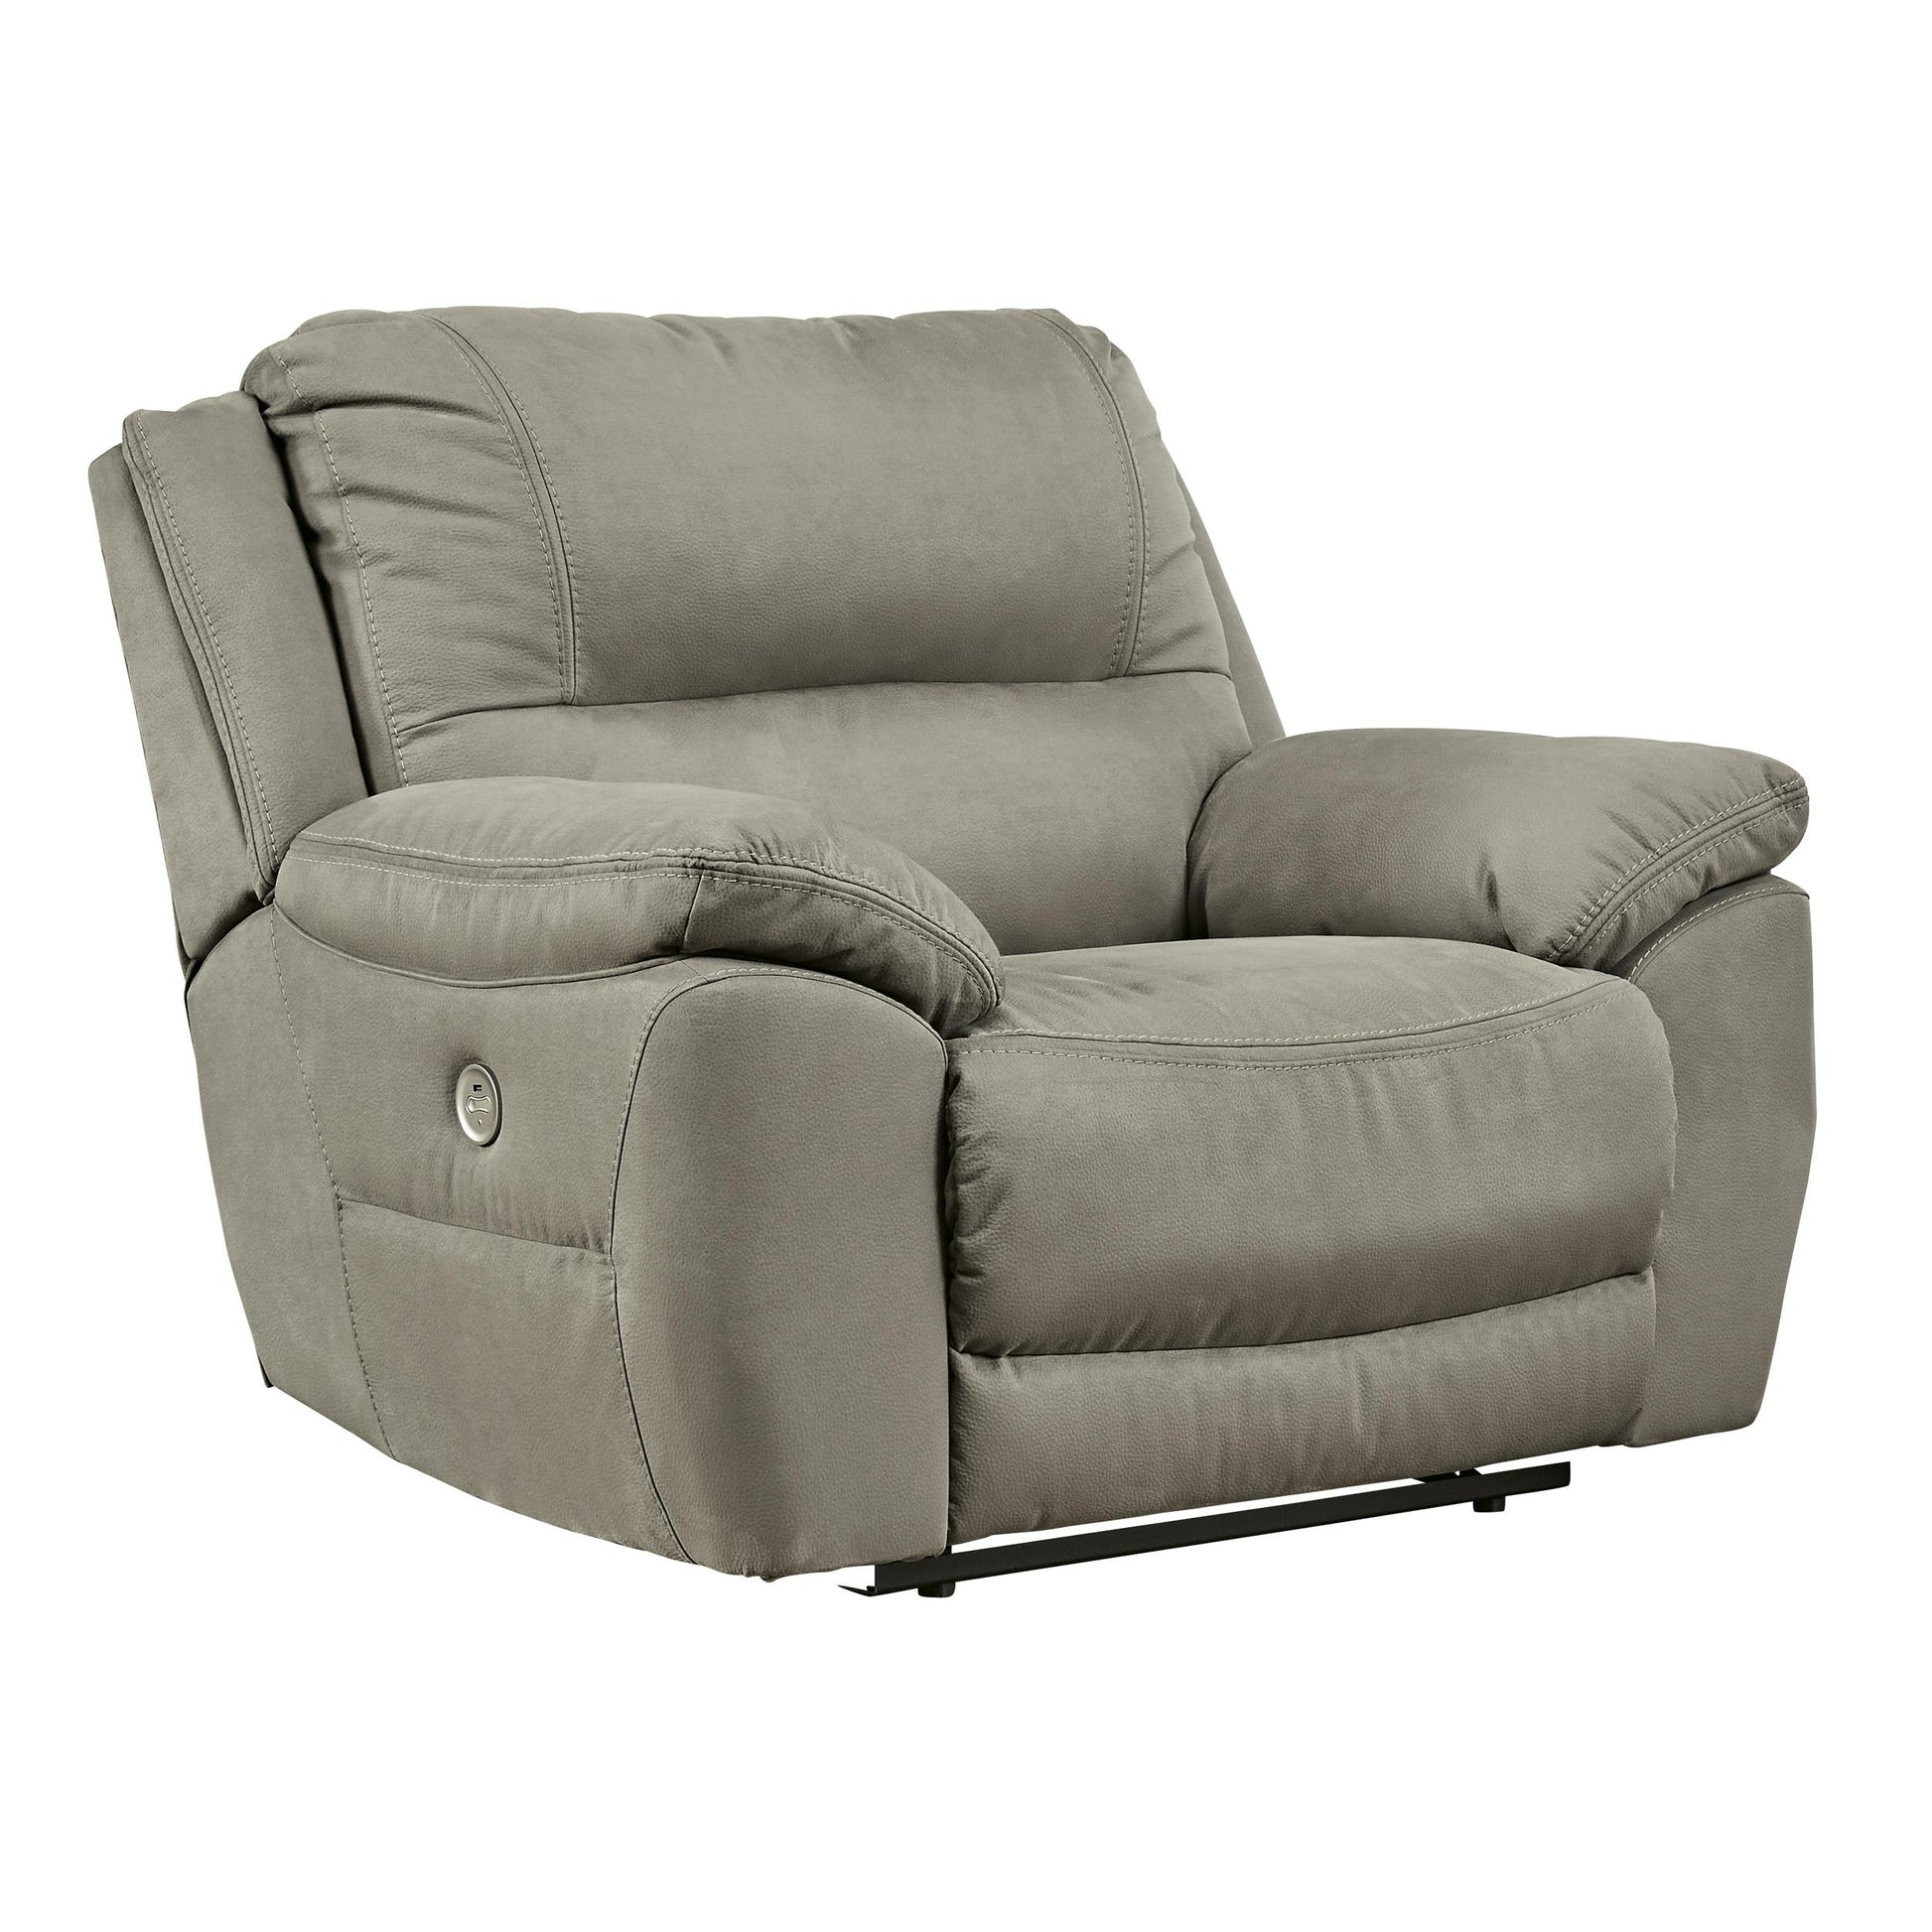 Signature Design by Ashley Next-Gen Gaucho Power Leather Look Recliner with Wall Recline 5420382 IMAGE 1